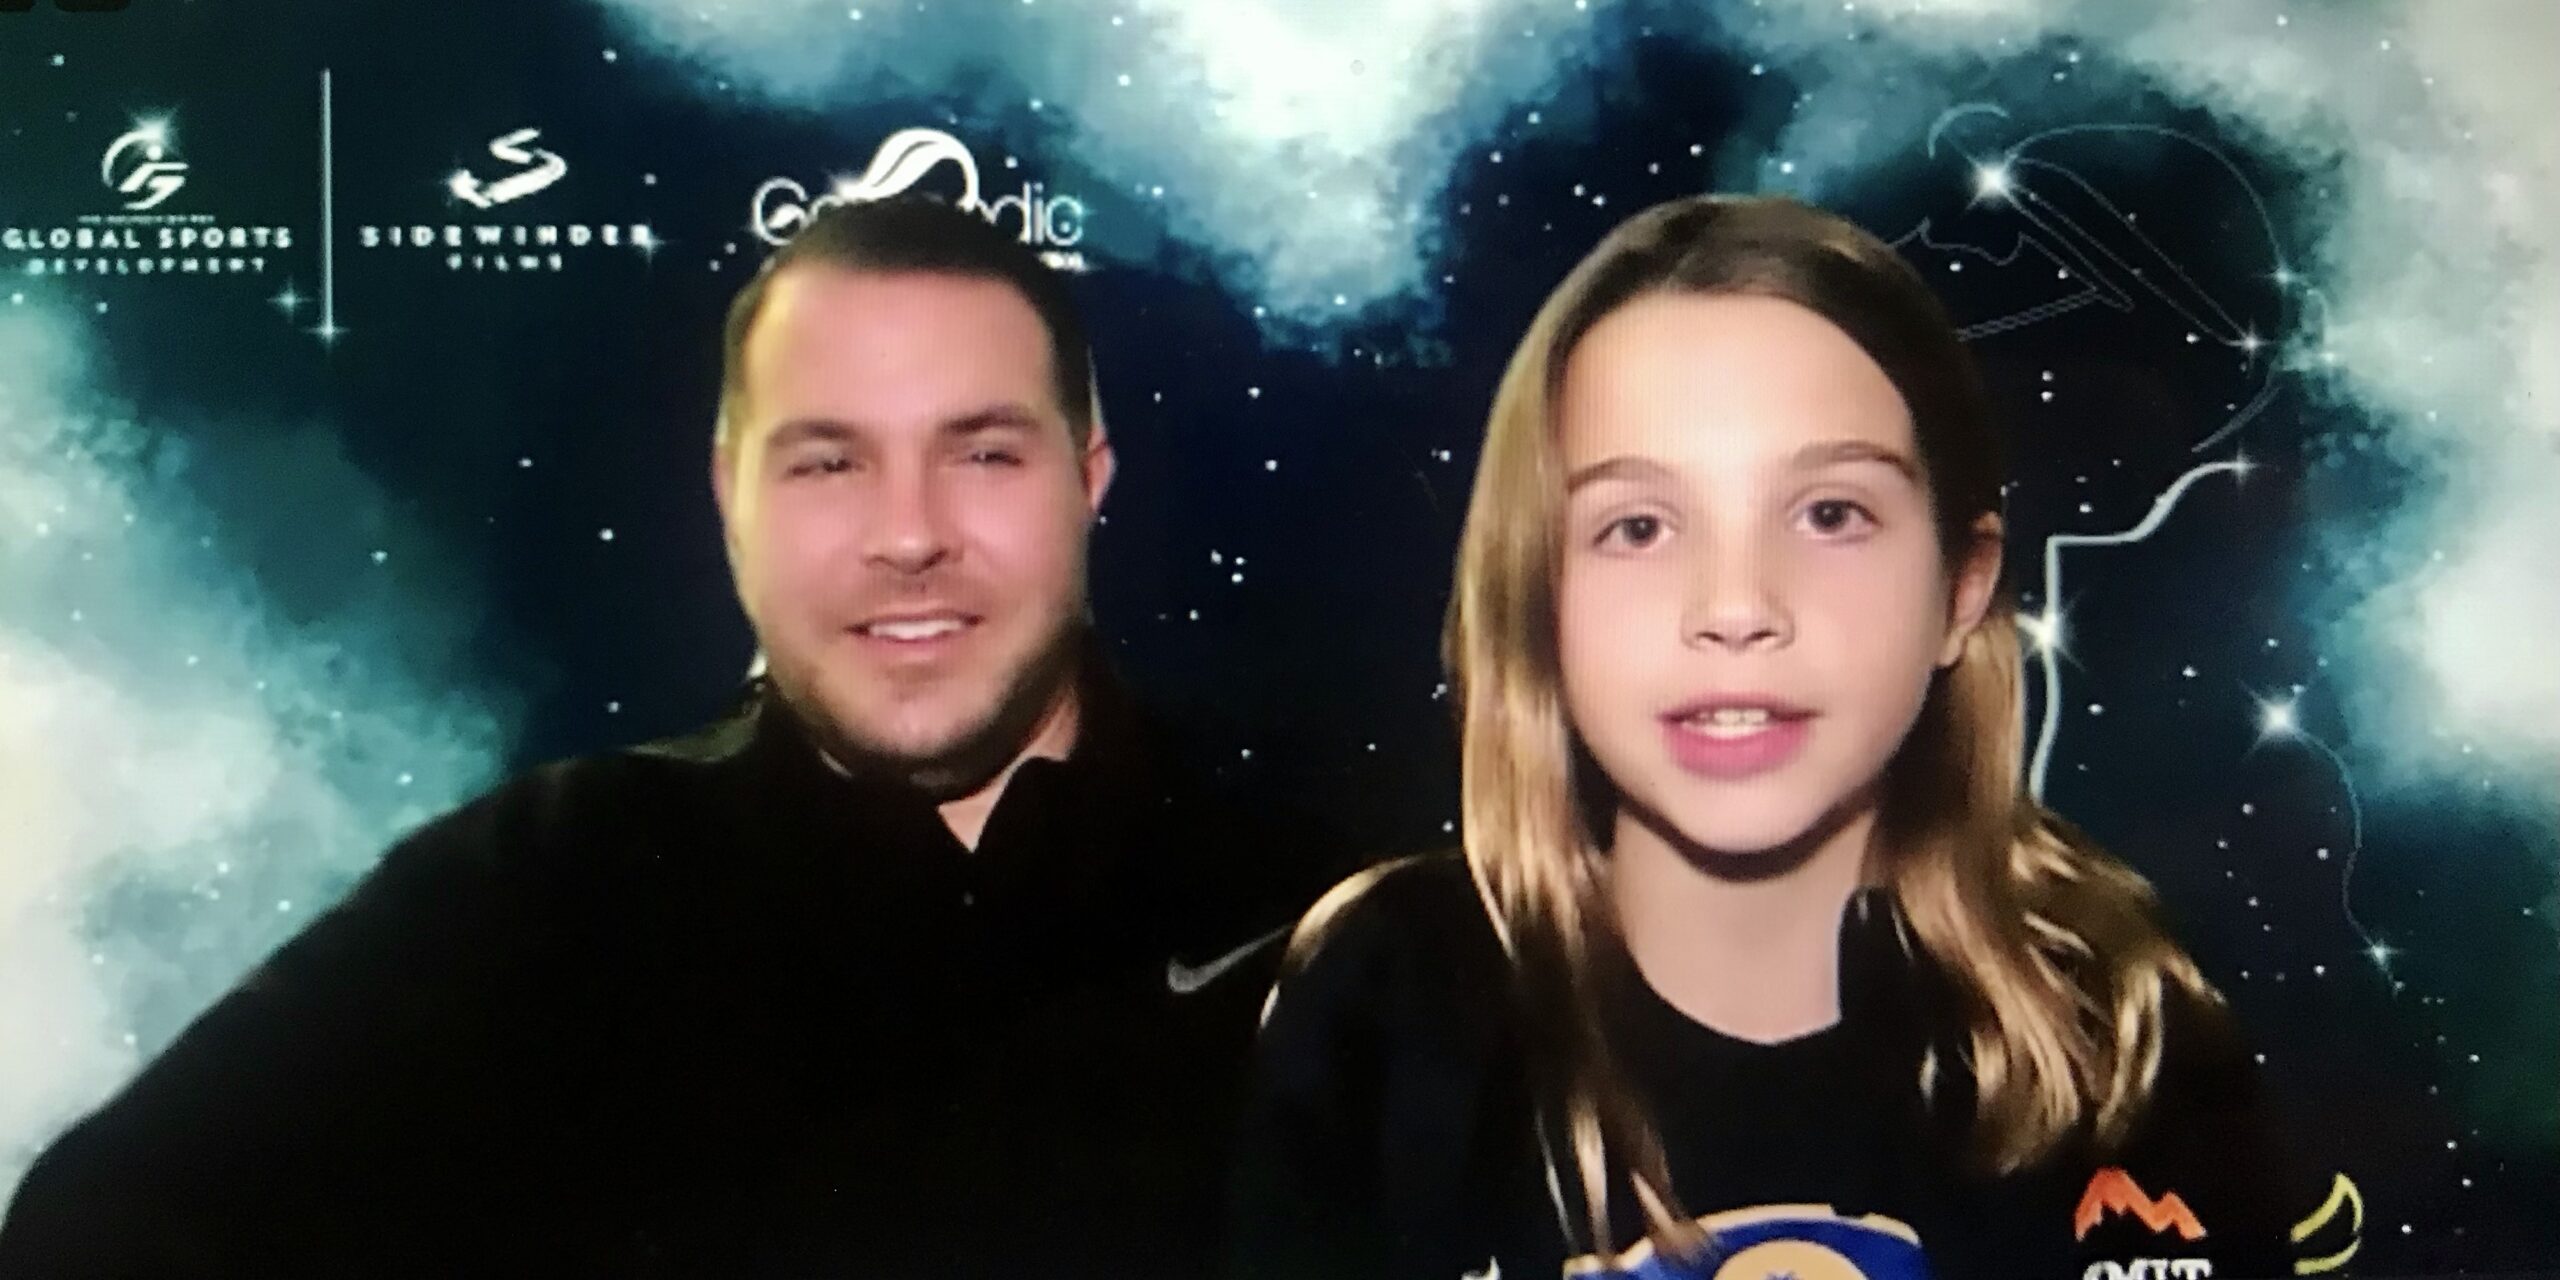 A Zoom screenshot of Cami Wood with a family member. They have an outer space themed virtual background.